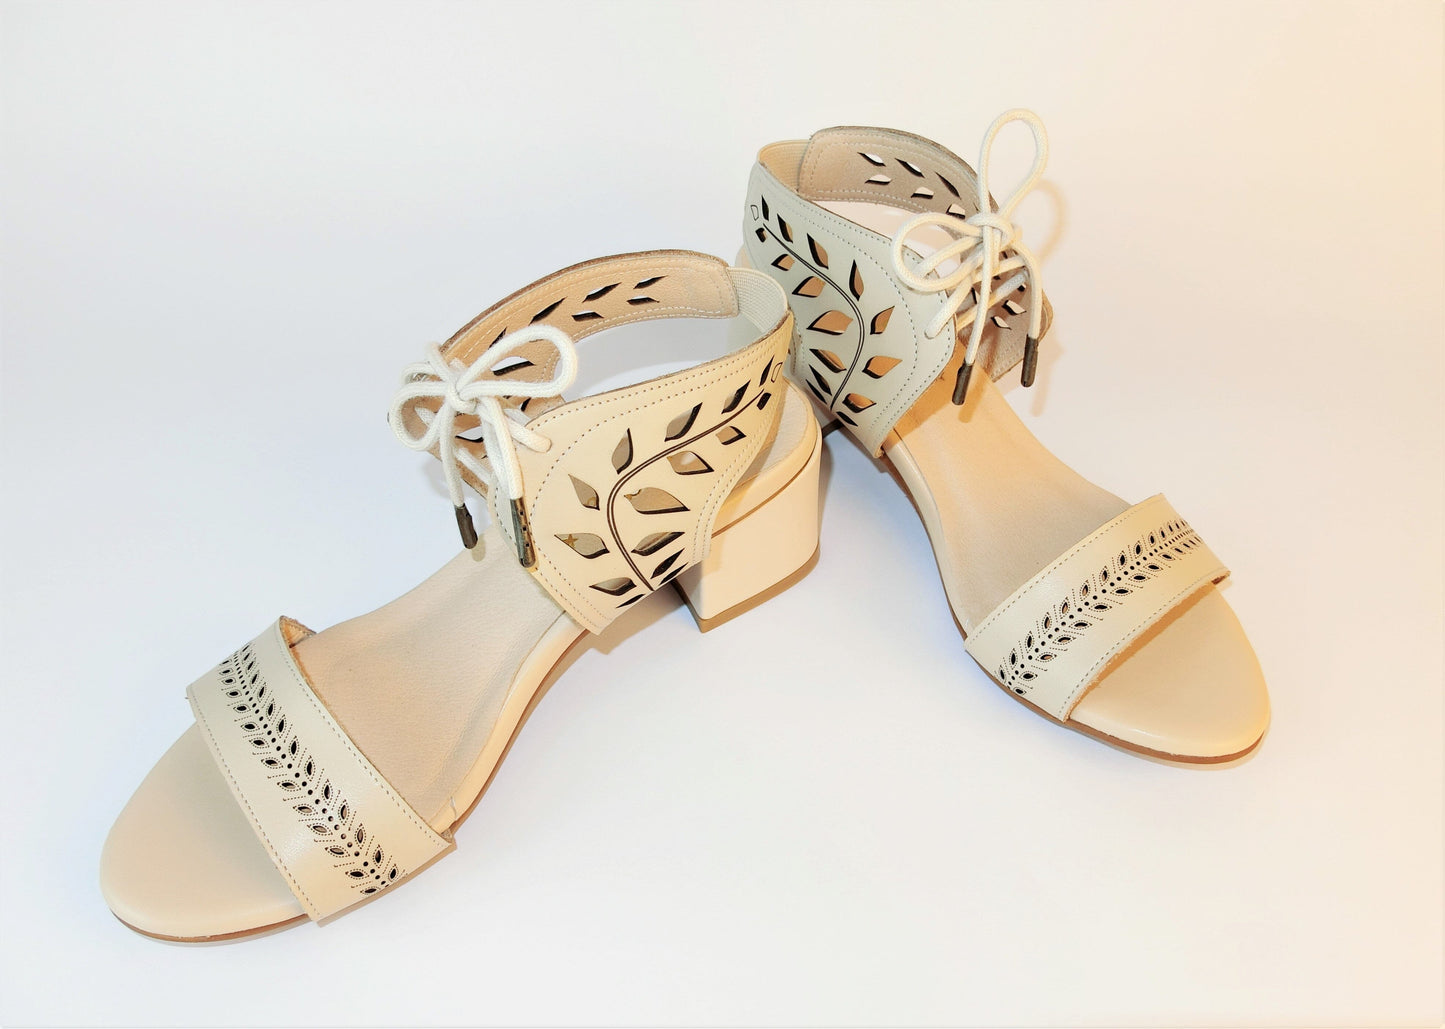 SS21002 Leather laser cut block heel sandals in Tan and Beige sandals Sam Star Shoes Beige 41 (8) 